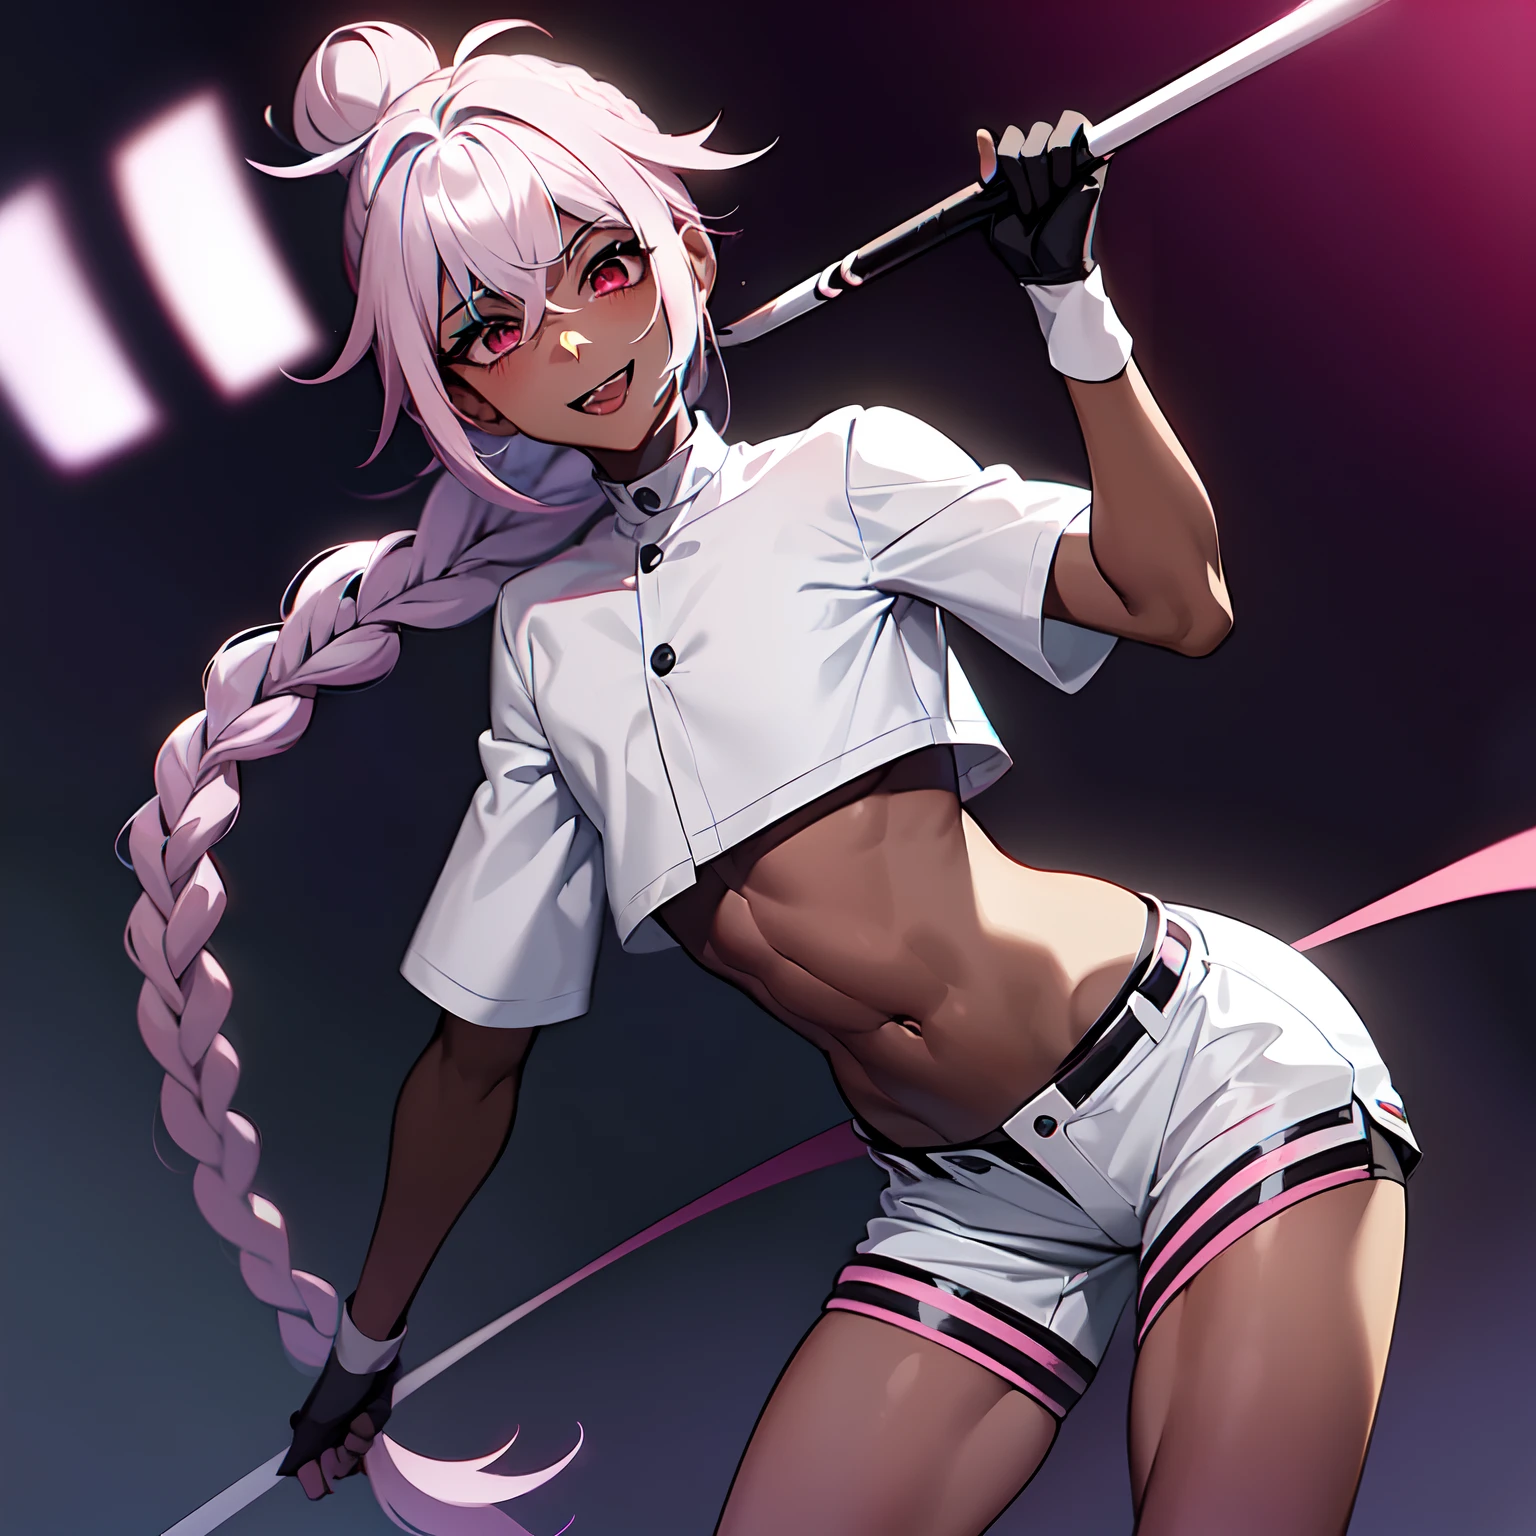 ((anime boy )), ((androgynous)),((Dark Skin)), ((long white hair  with pink streaks)),(( hair Styled  into a Bun and braided ponytail )),((Red eyes)) , (Tall),(thin, average hips),(White half jacket), ((hot pink  Crop top)) ,(Skimpy white shorts) ,  evil aura, crazy smile , ((Pop Idol)) , ((yandere: 1.5)), ((Masterpiece)), High Aesthetic, ((high quality )),((1boy, Solo))